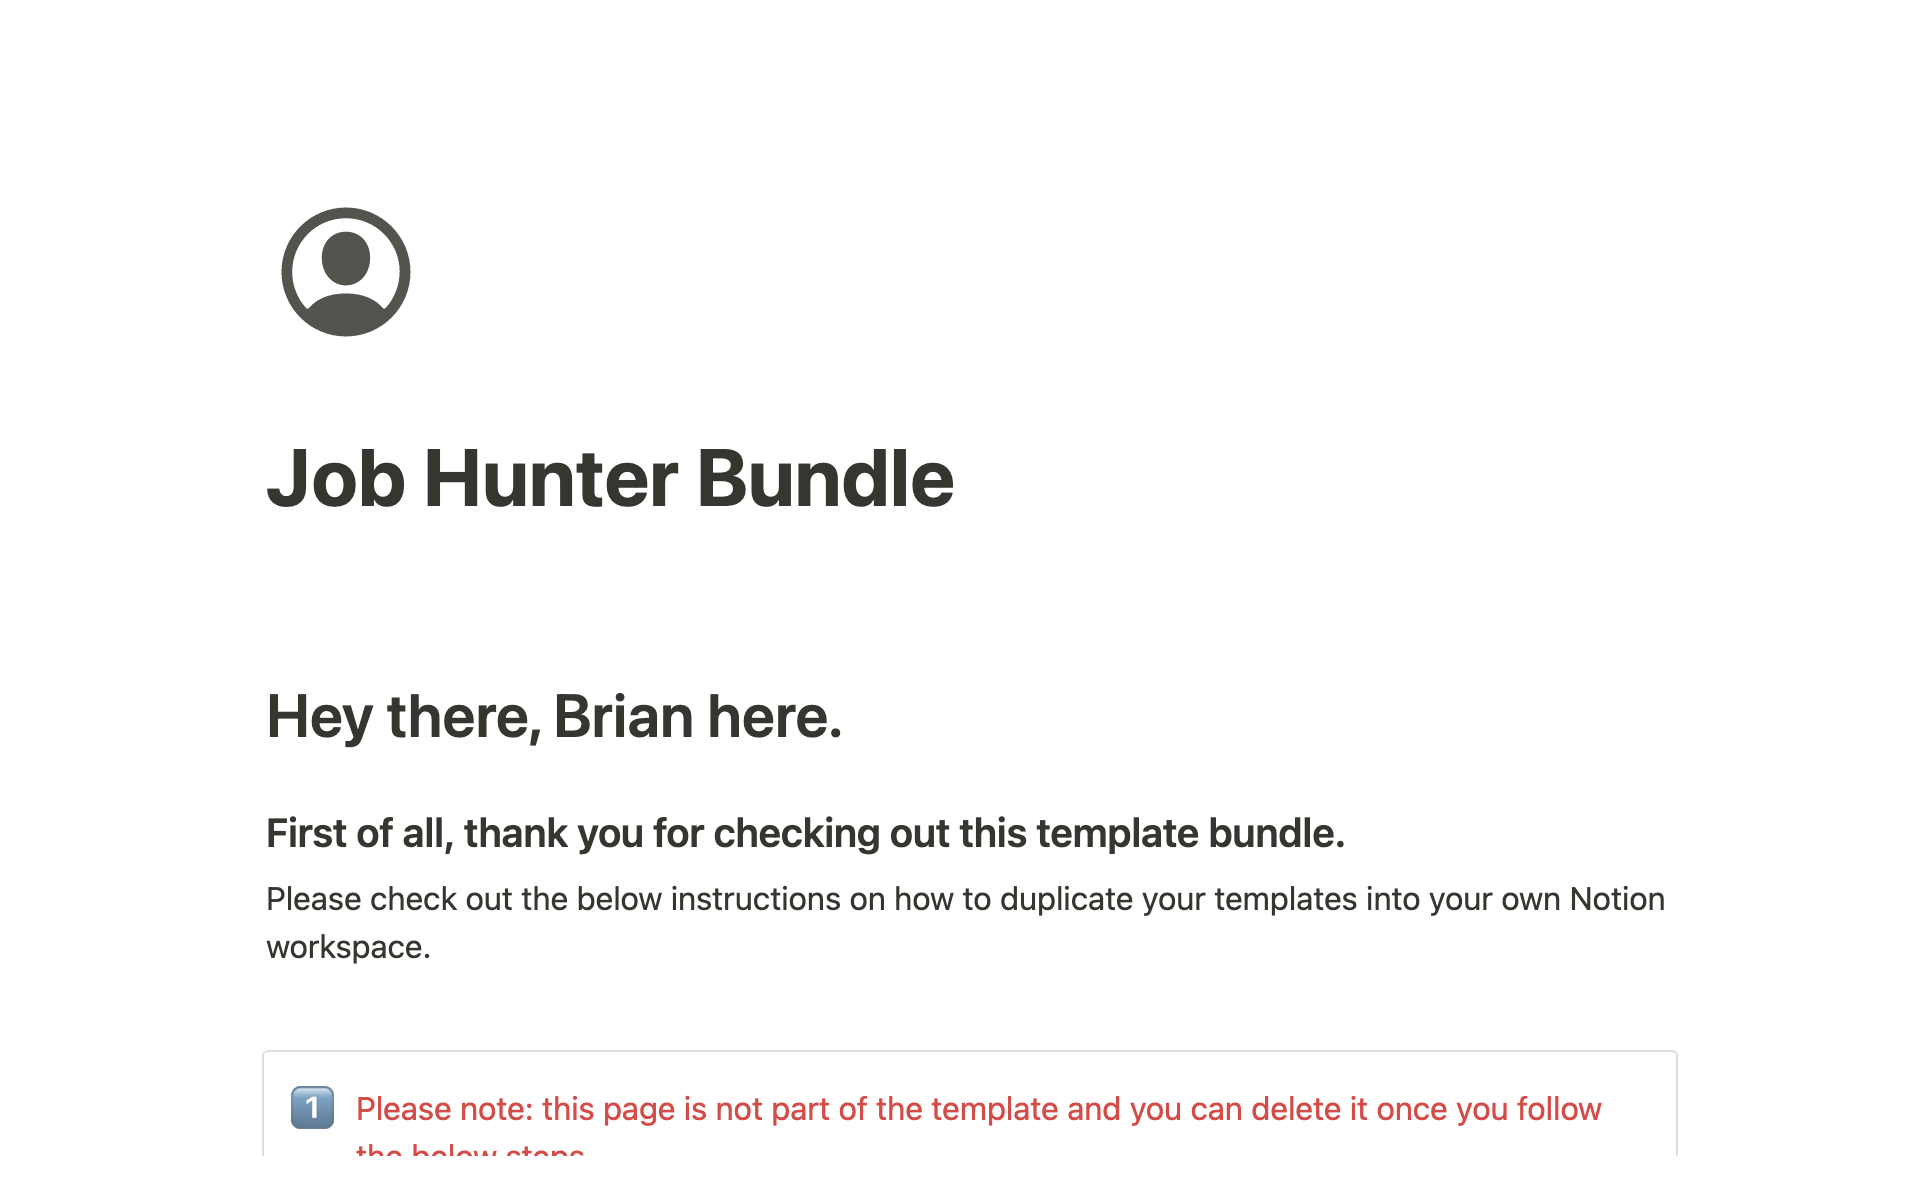 Speed up your job application process with Job Hunter Bundle, the ultimate Notion bundle for those that are serious about securing their next role.